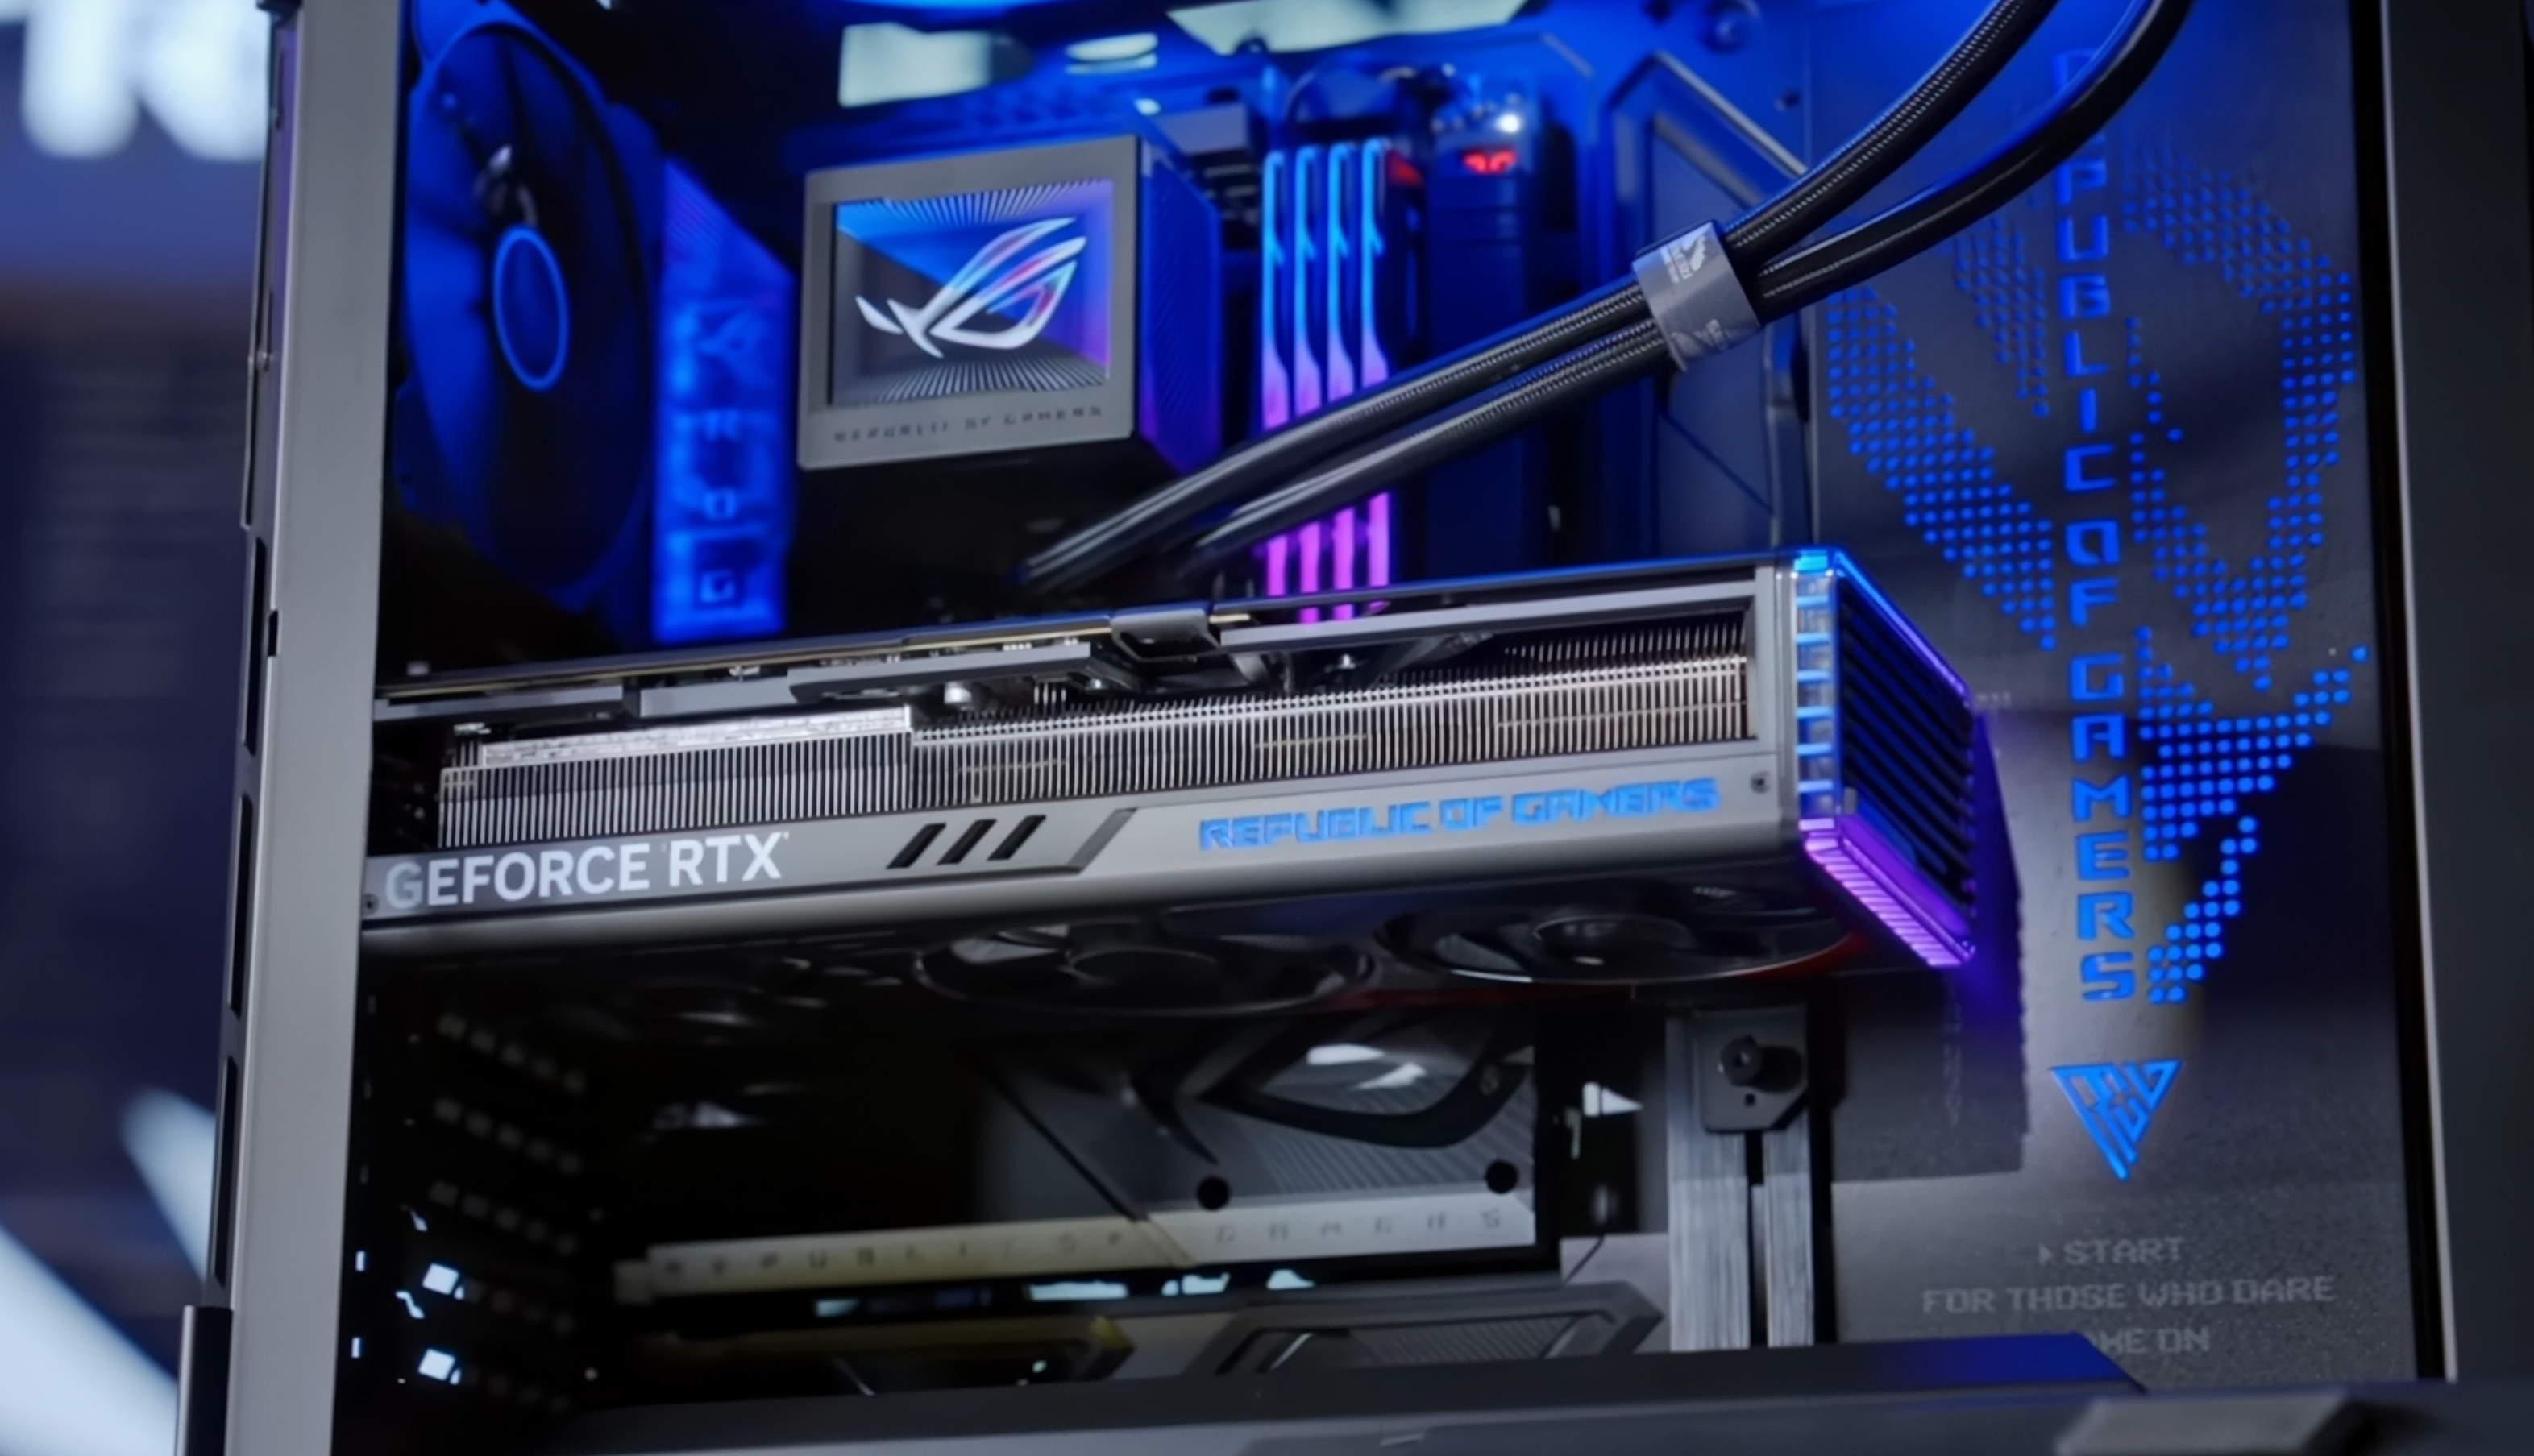 ASUS-Intros-ROG-Maximus-Z790-HERO-ROG-STRIX-RTX-4090-BTF-Edition-PC-Components-With-Hidden-Power-Connectors-_10.png